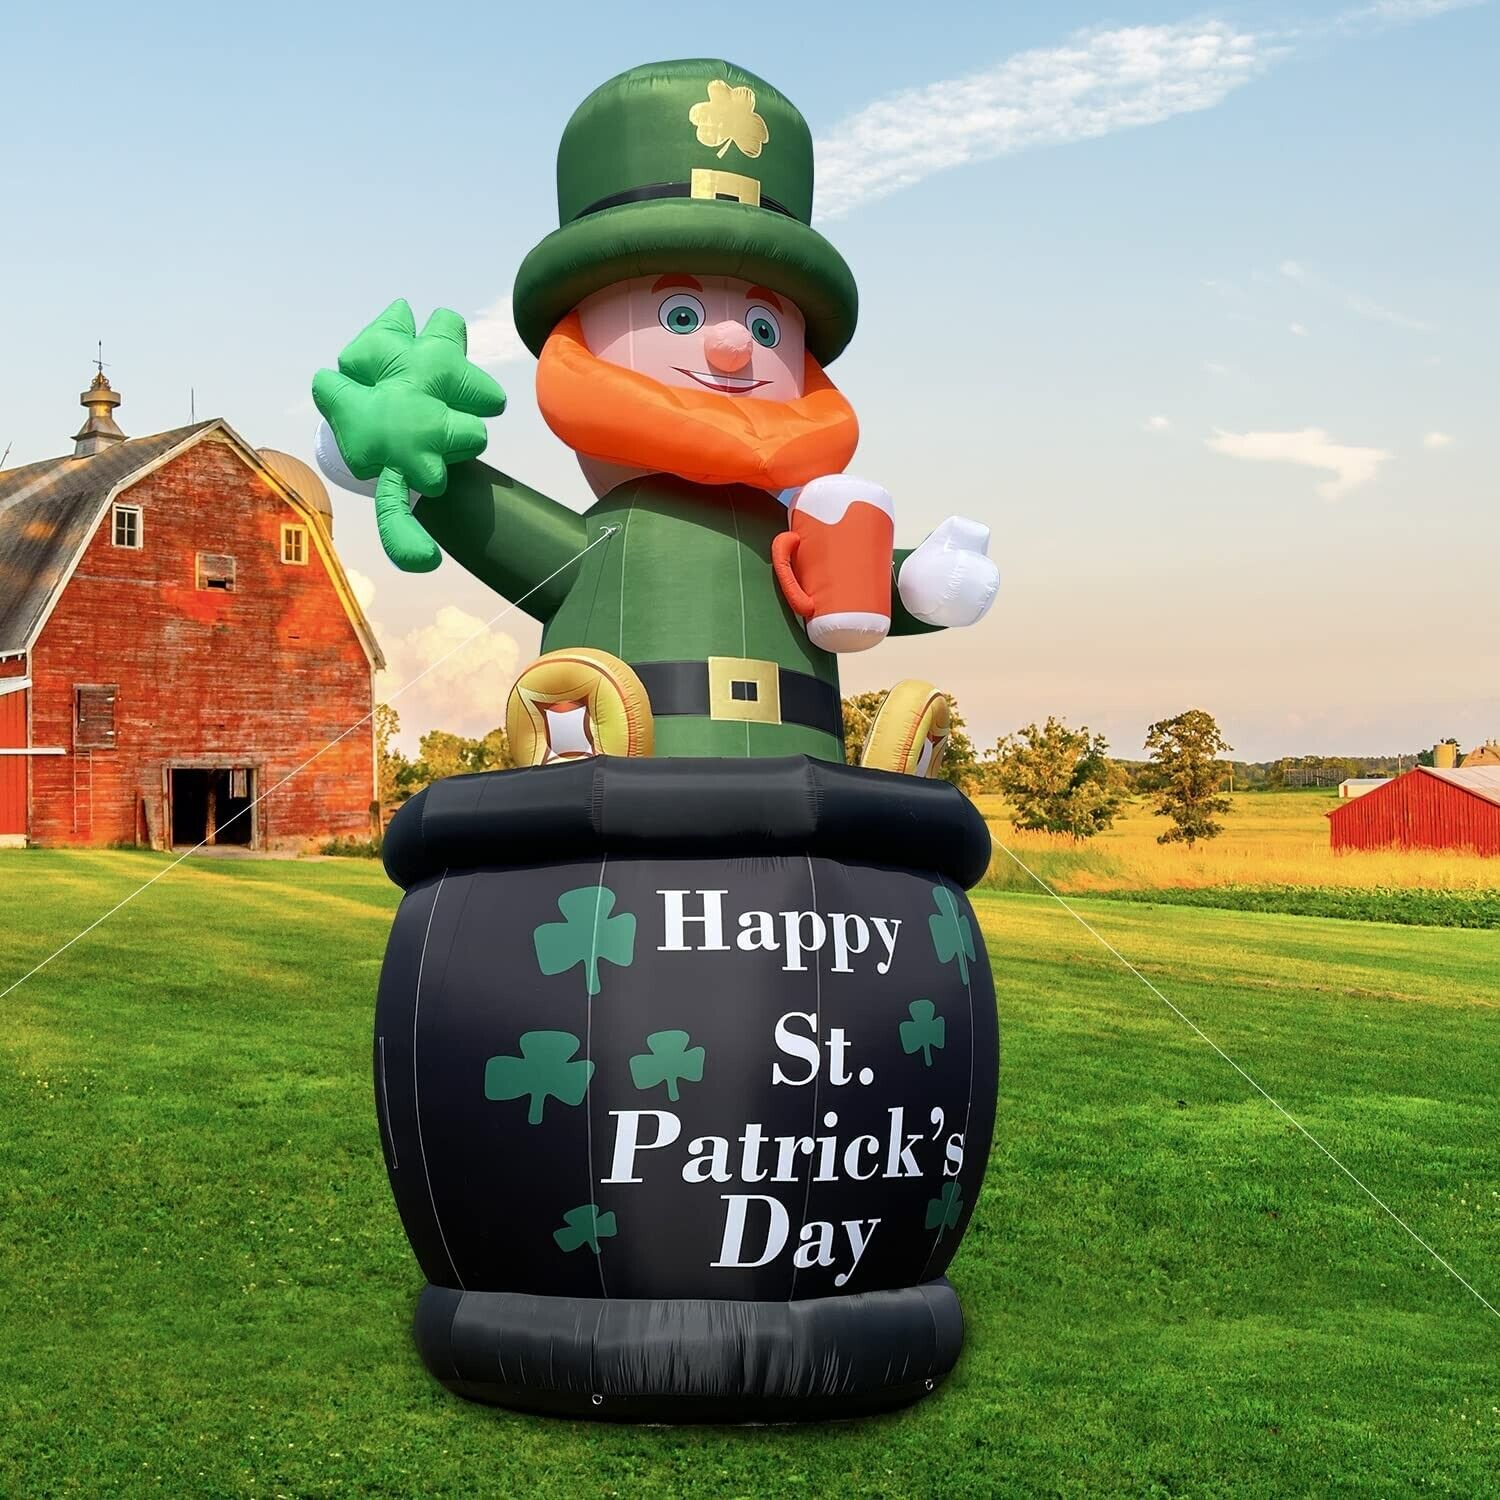 26FT H ST PATRICKS DAY COLOSAL  LEPRECHAUN IN POT GOLD LED AIRBLOWN INFLATABLE